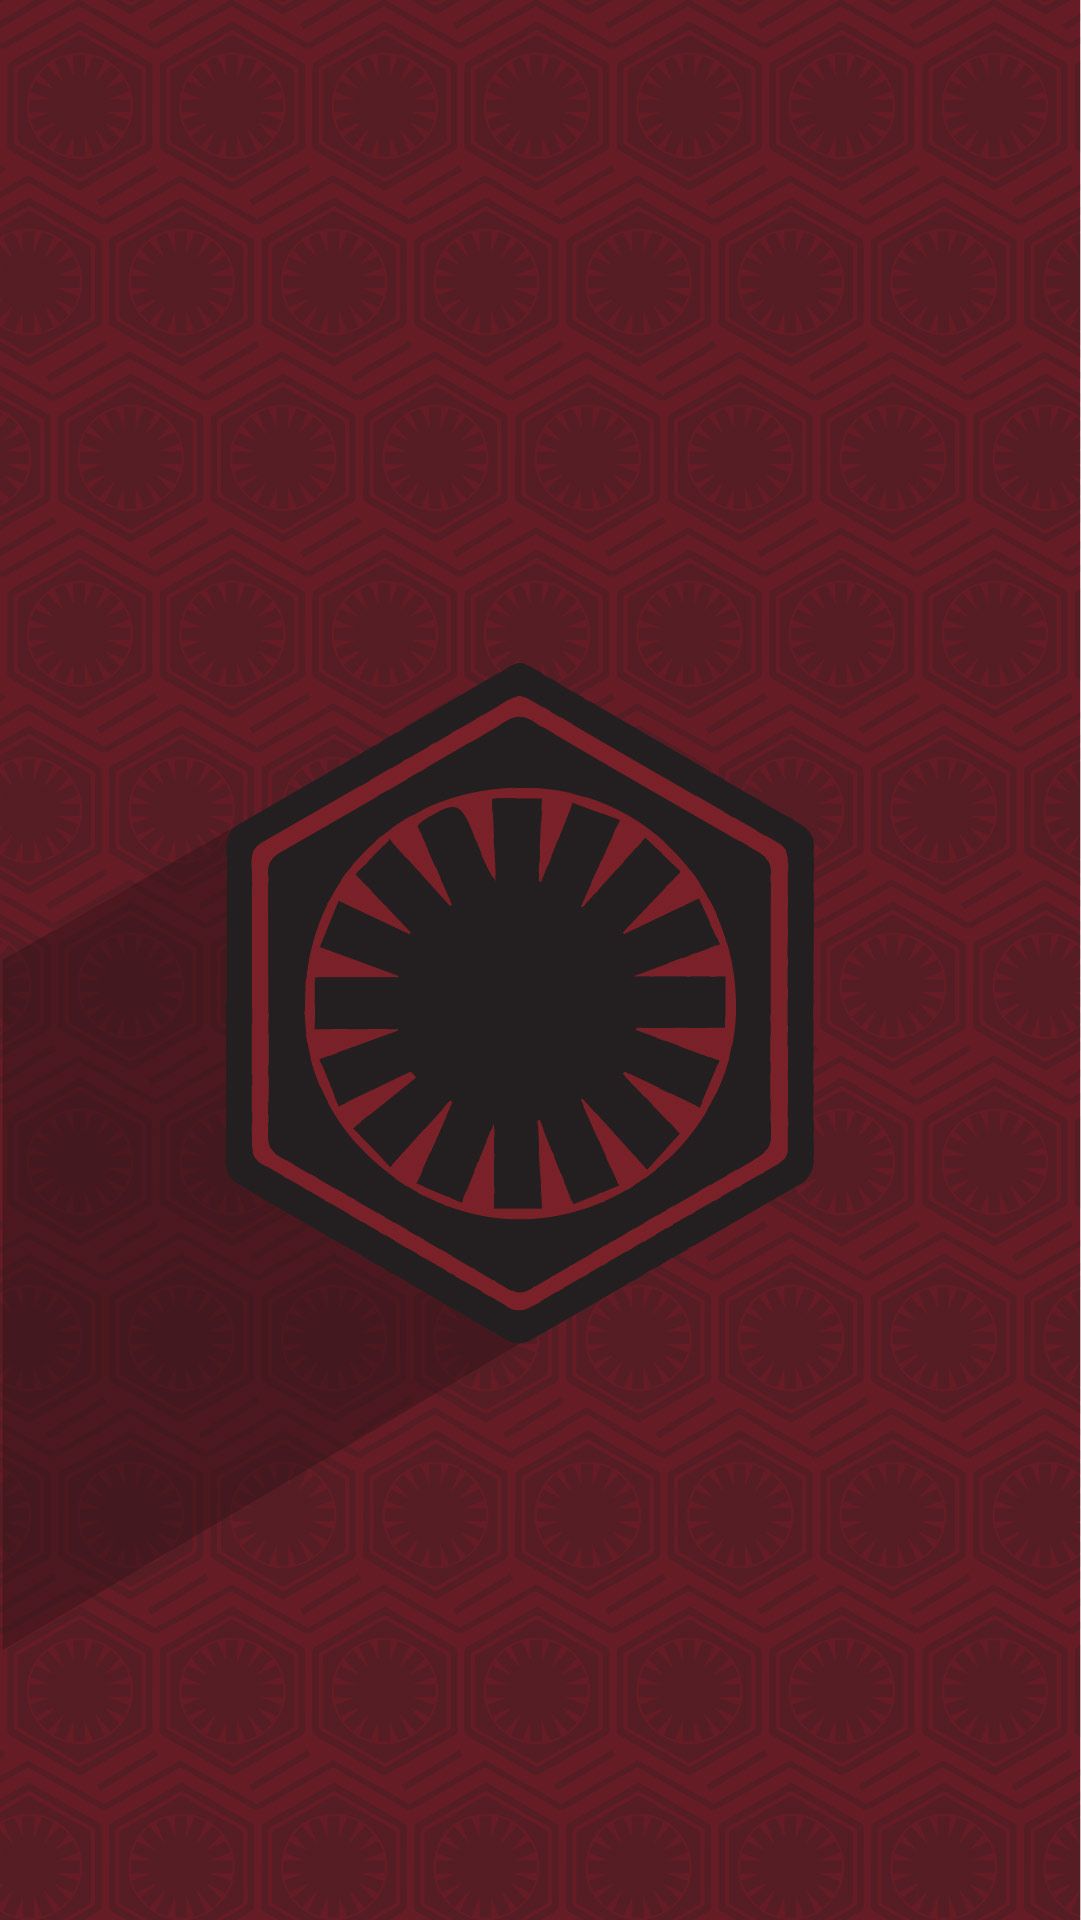 1081x1920 Star Wars Wallpaper For Mobile Devices